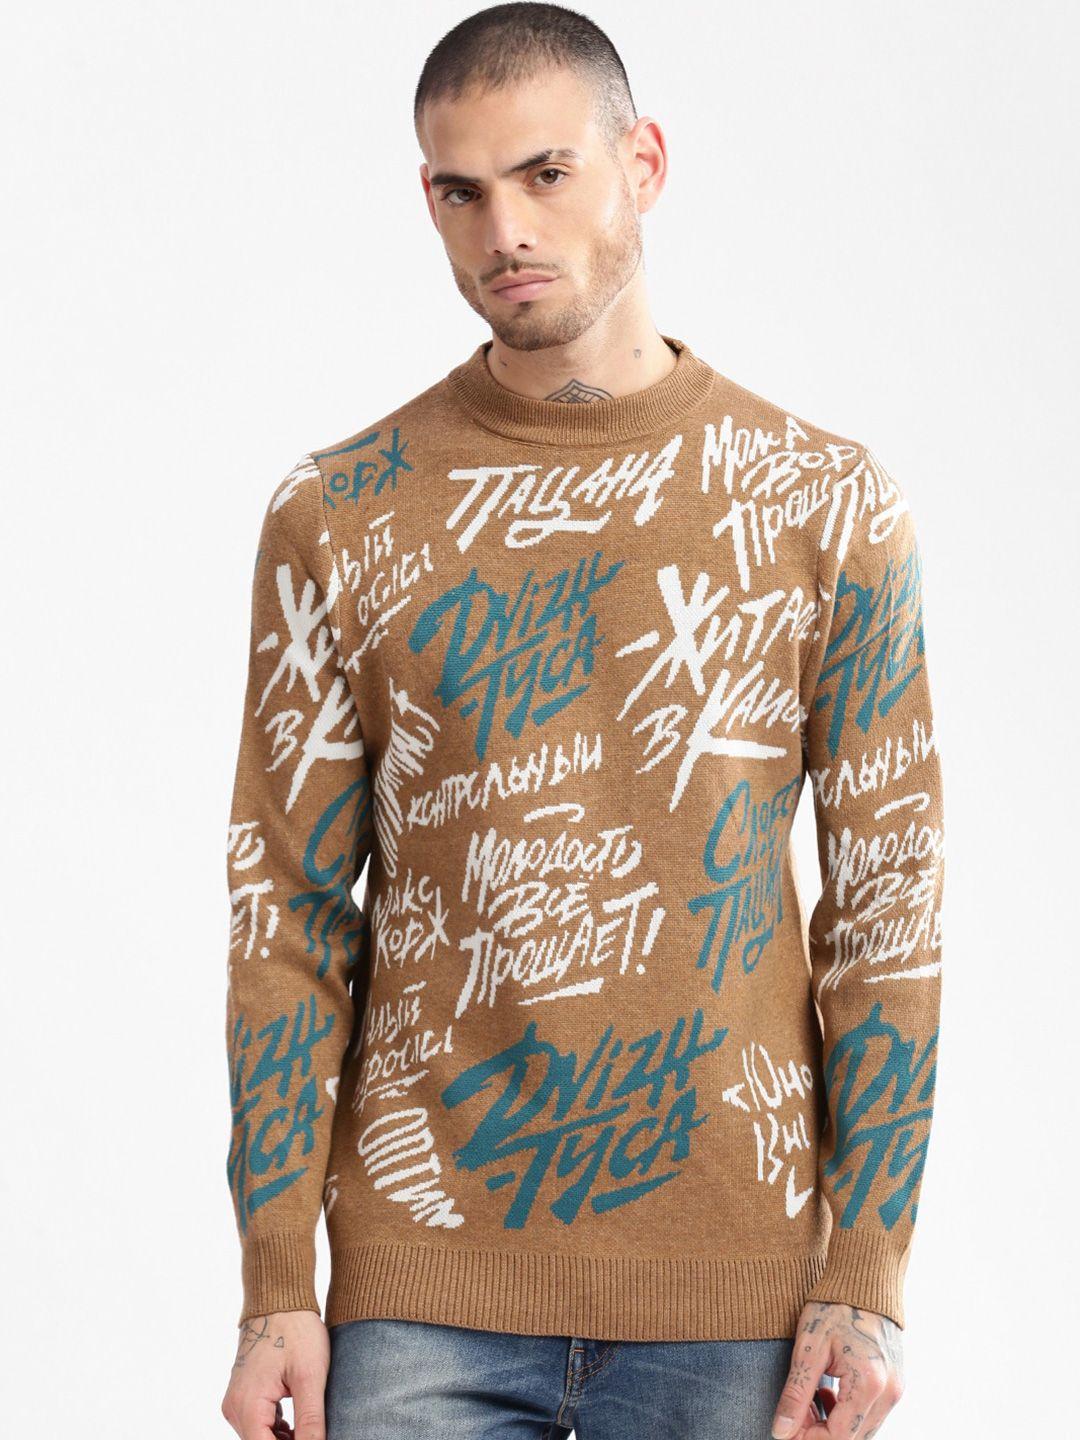 showoff-typography-printed-acrylic-pullover-sweater